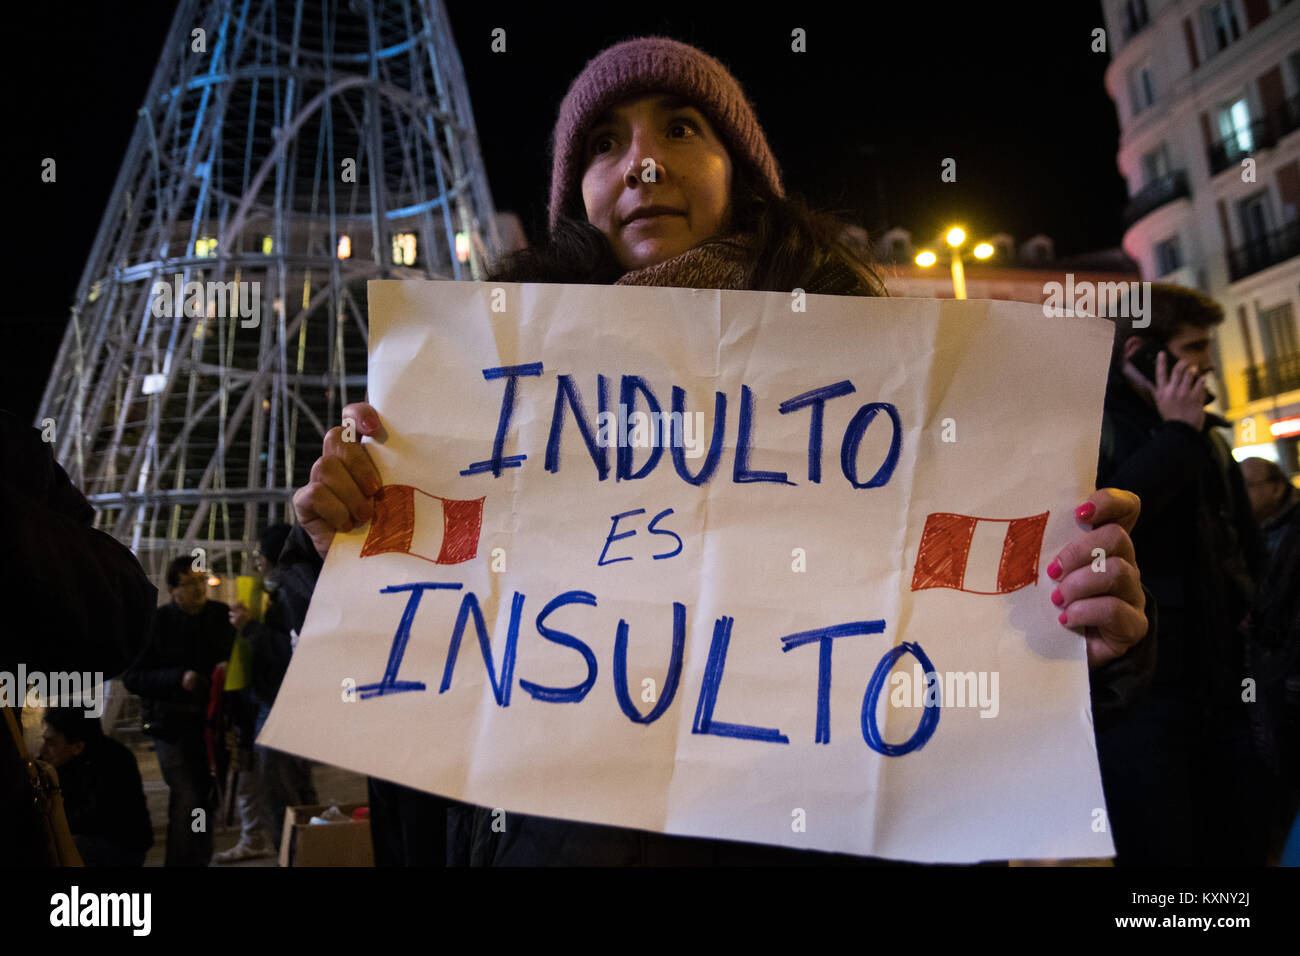 Madrid, Spain. 11th Jan, 2018. A woman with a placard that reads 'pardon is insult' during a protest against the pardon to Peruvian President Alberto Fujimori in Madrid, Spain. Credit: Marcos del Mazo/Alamy Live News Stock Photo